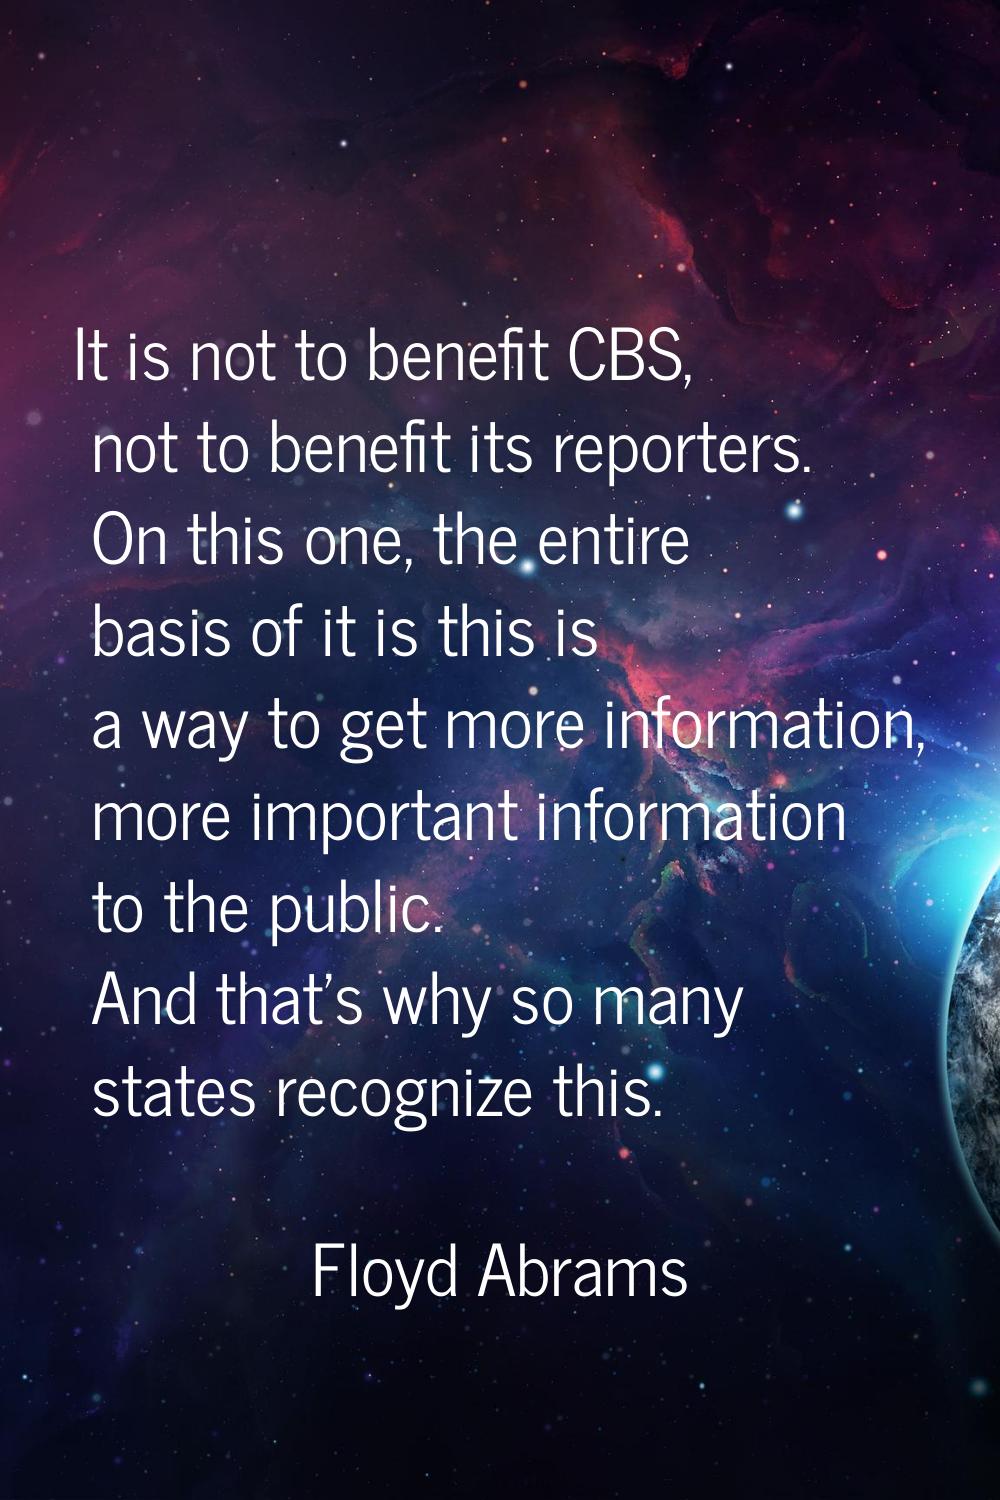 It is not to benefit CBS, not to benefit its reporters. On this one, the entire basis of it is this